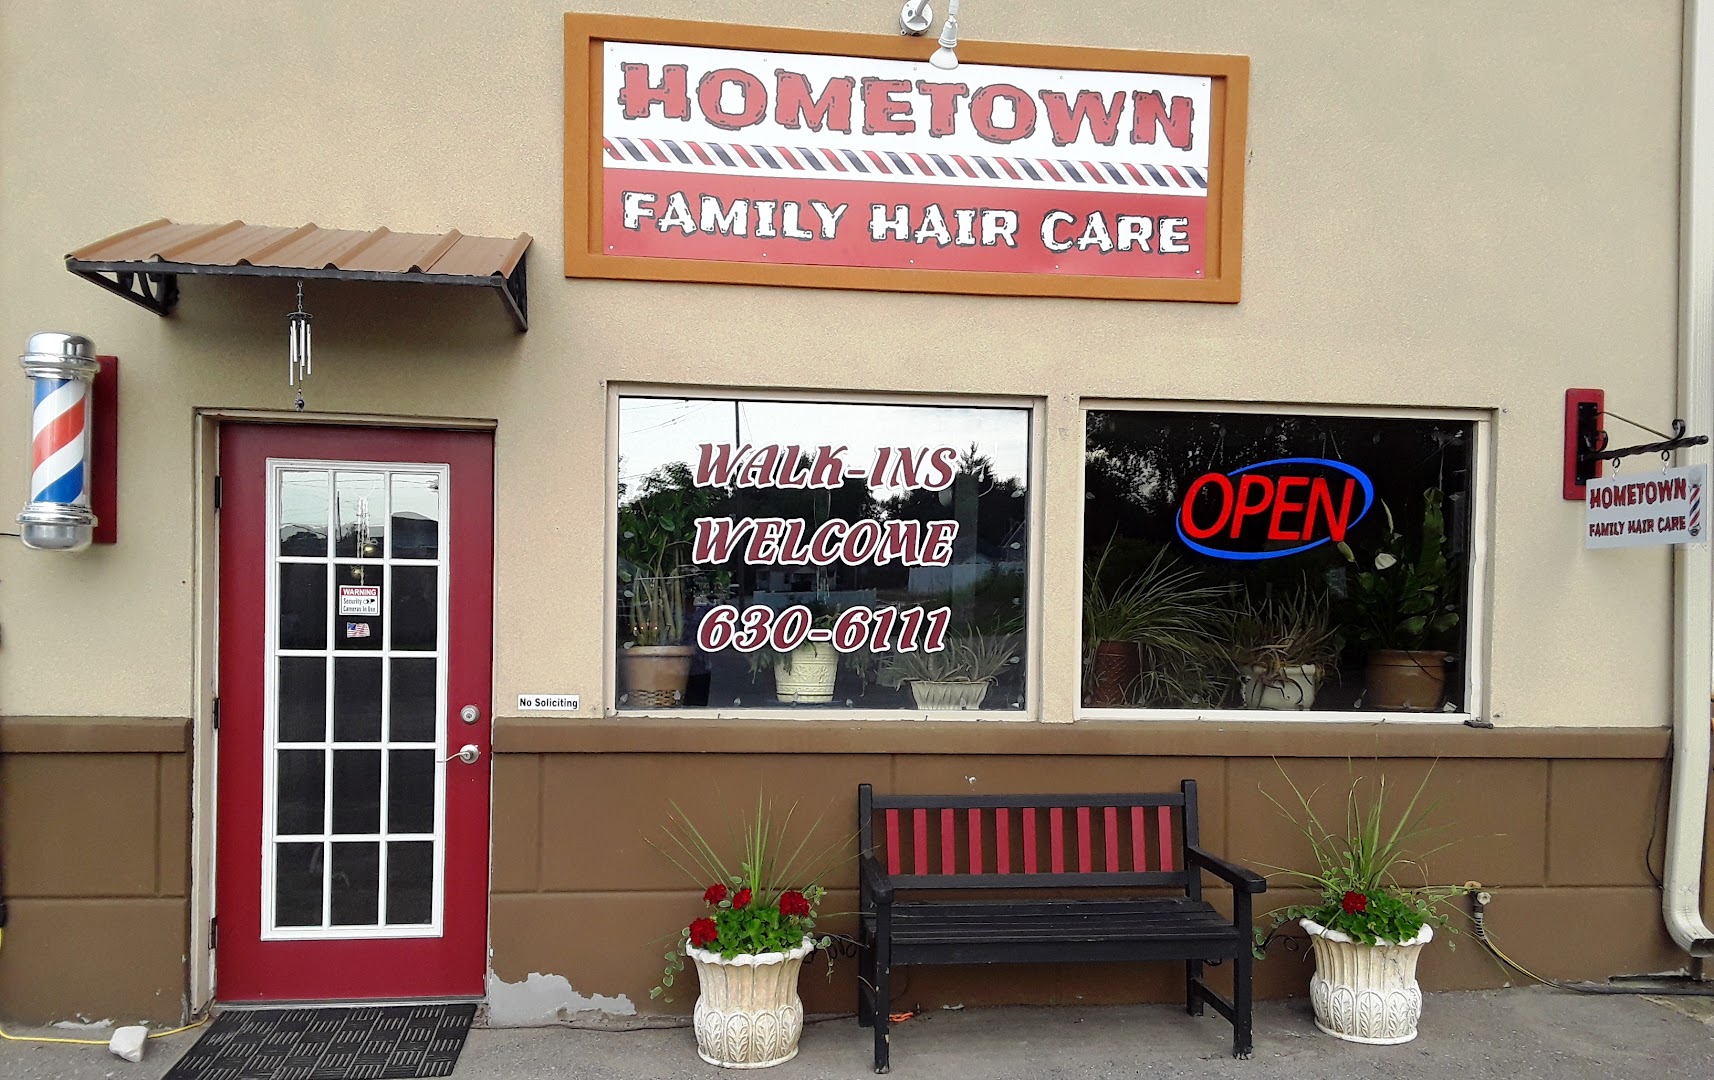 Hometown Family Hair Care